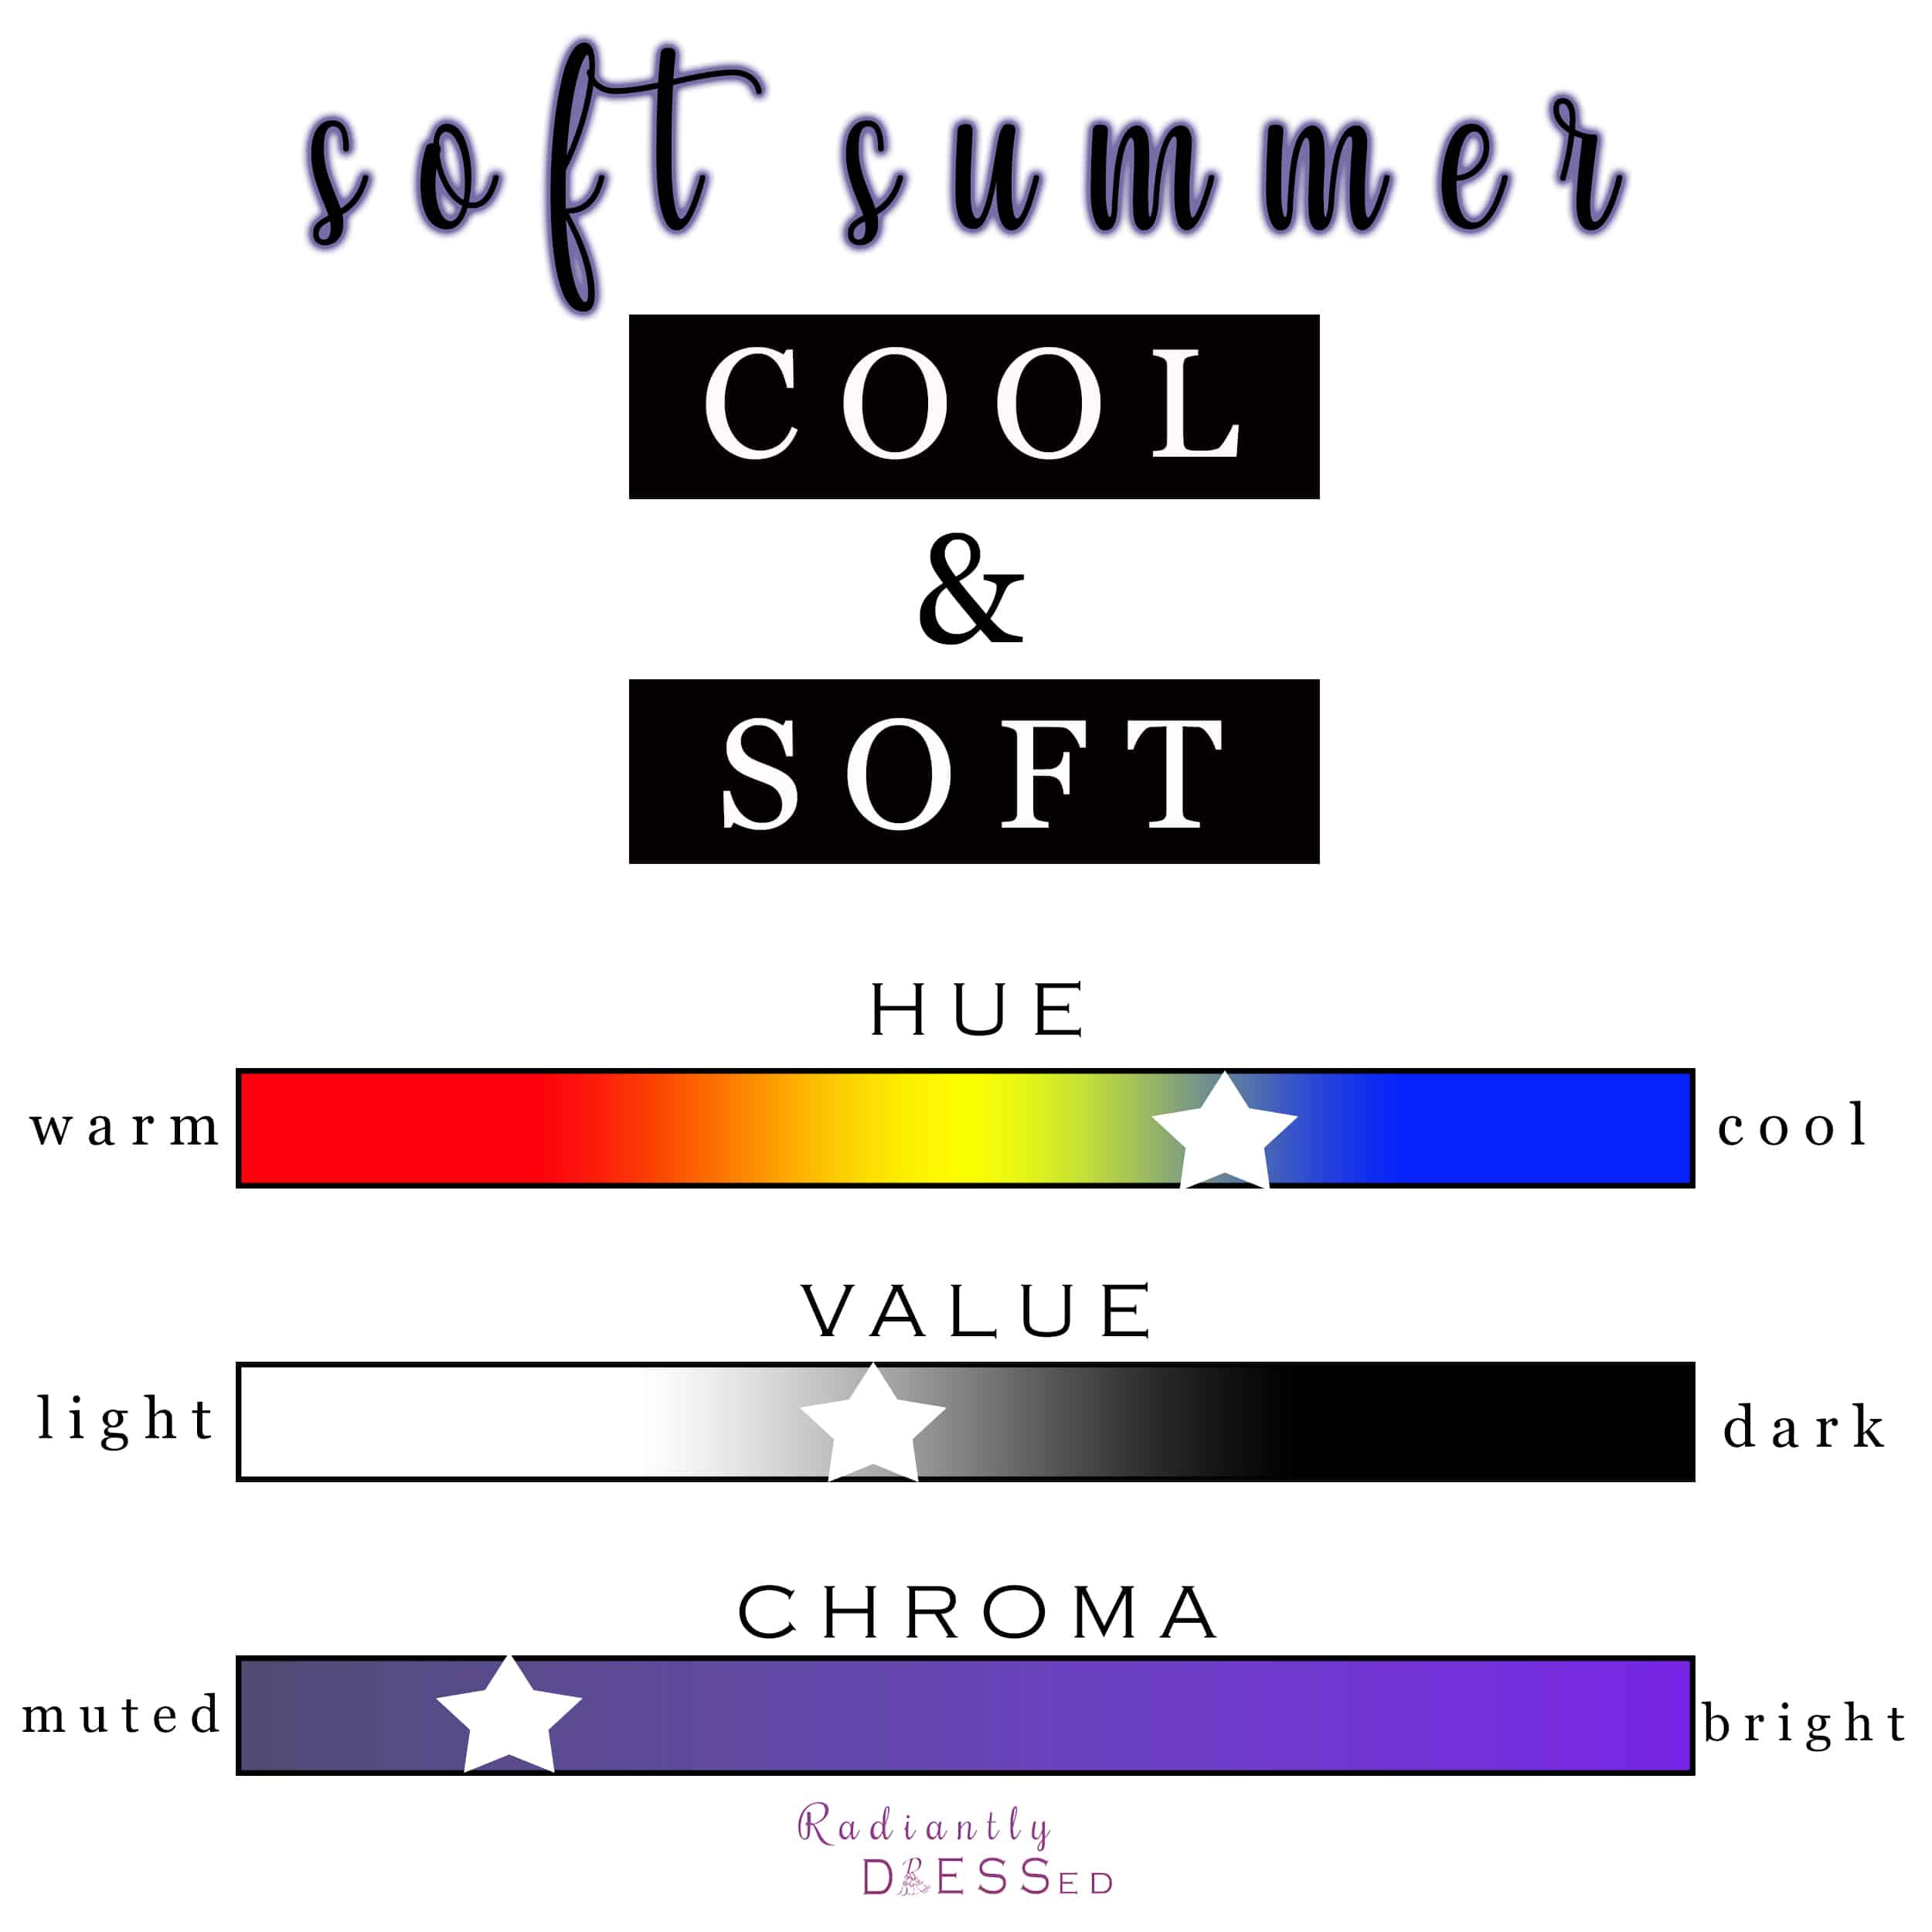 Soft Summer is cool and soft.